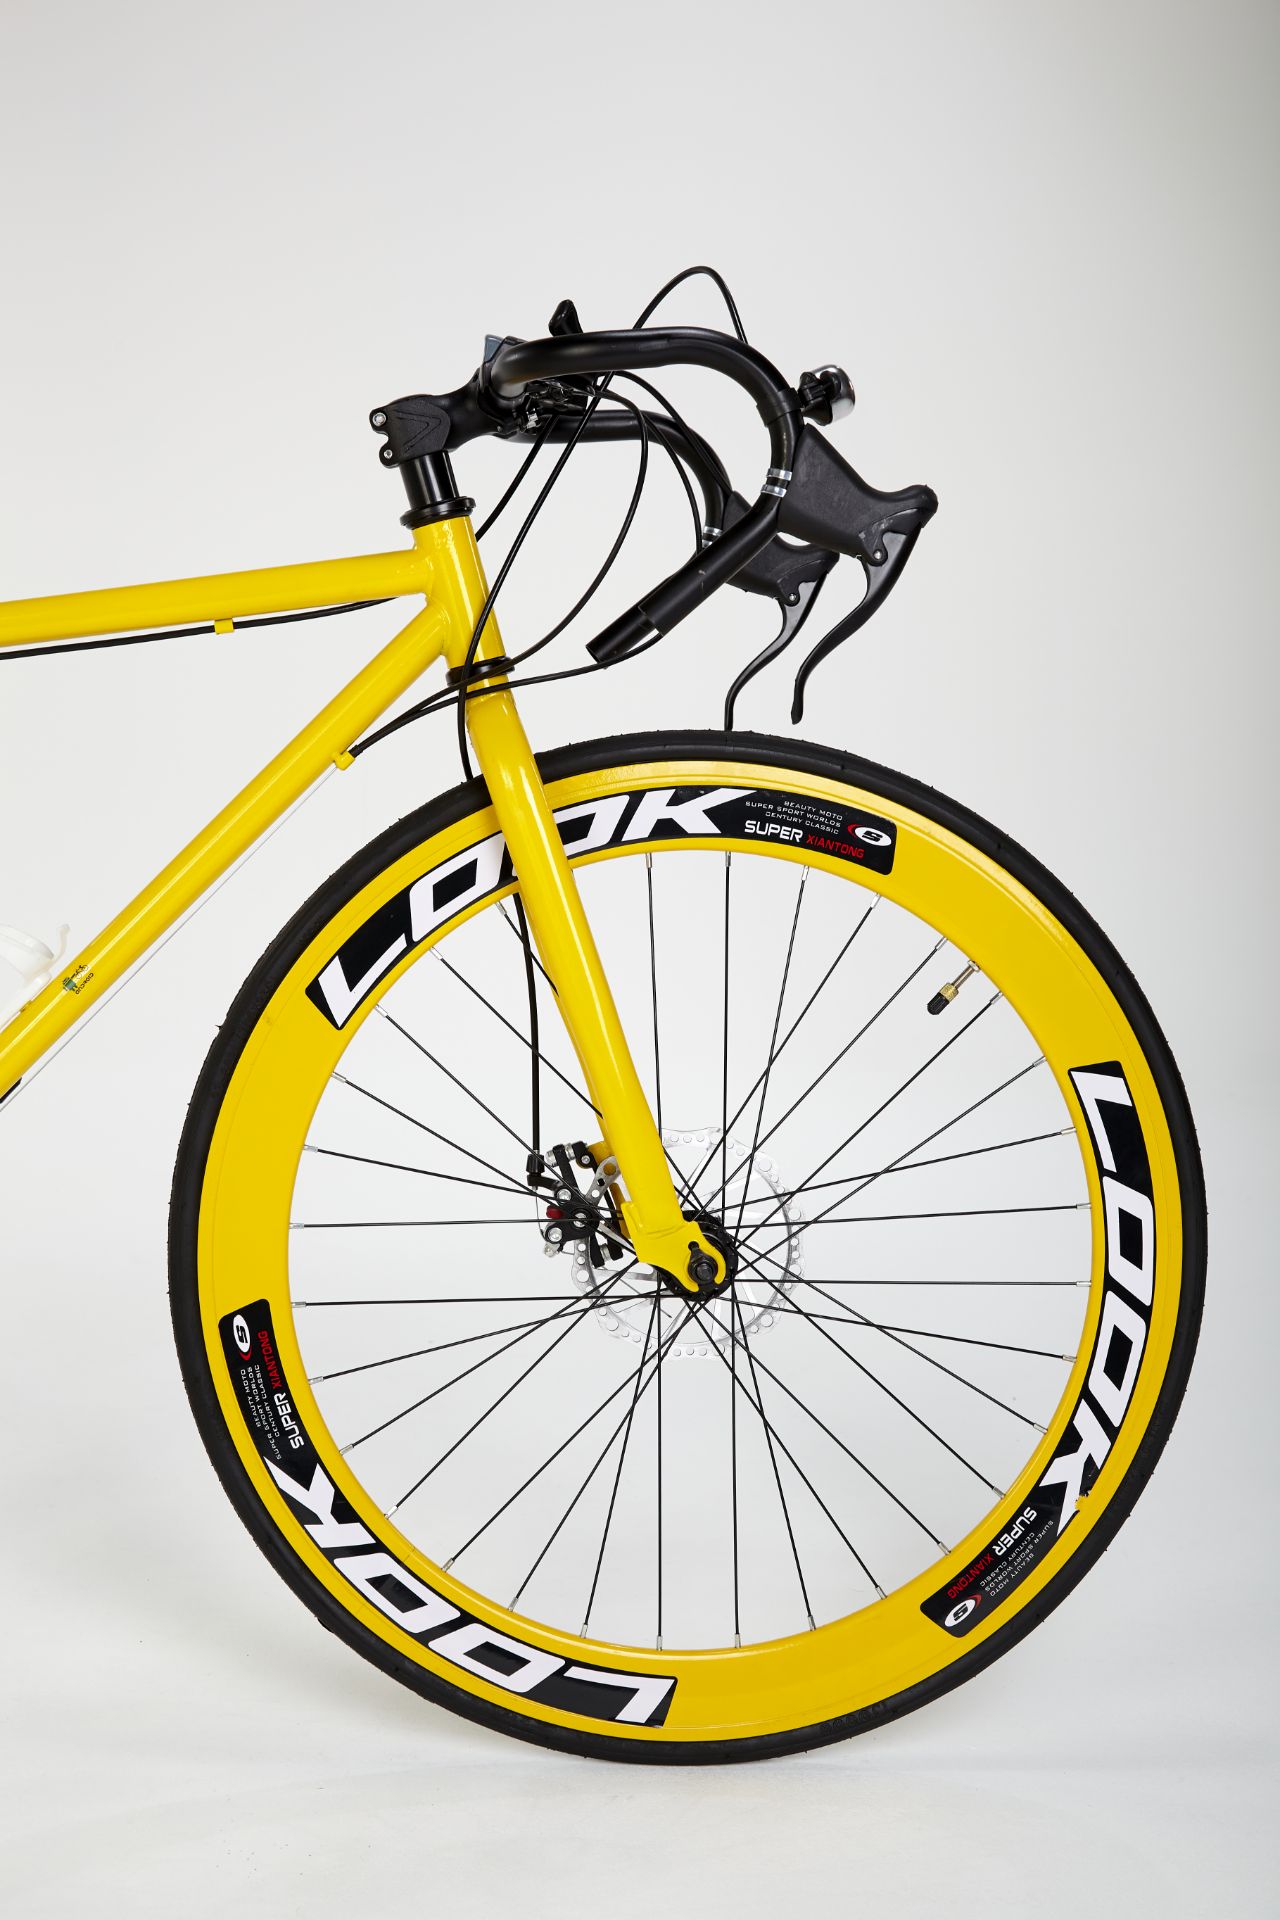 YELLOW STREET BIKE WITH 21 GREAR, BRAKE DISKS, KICK STAND, COOL THIN TYRES - Image 4 of 12